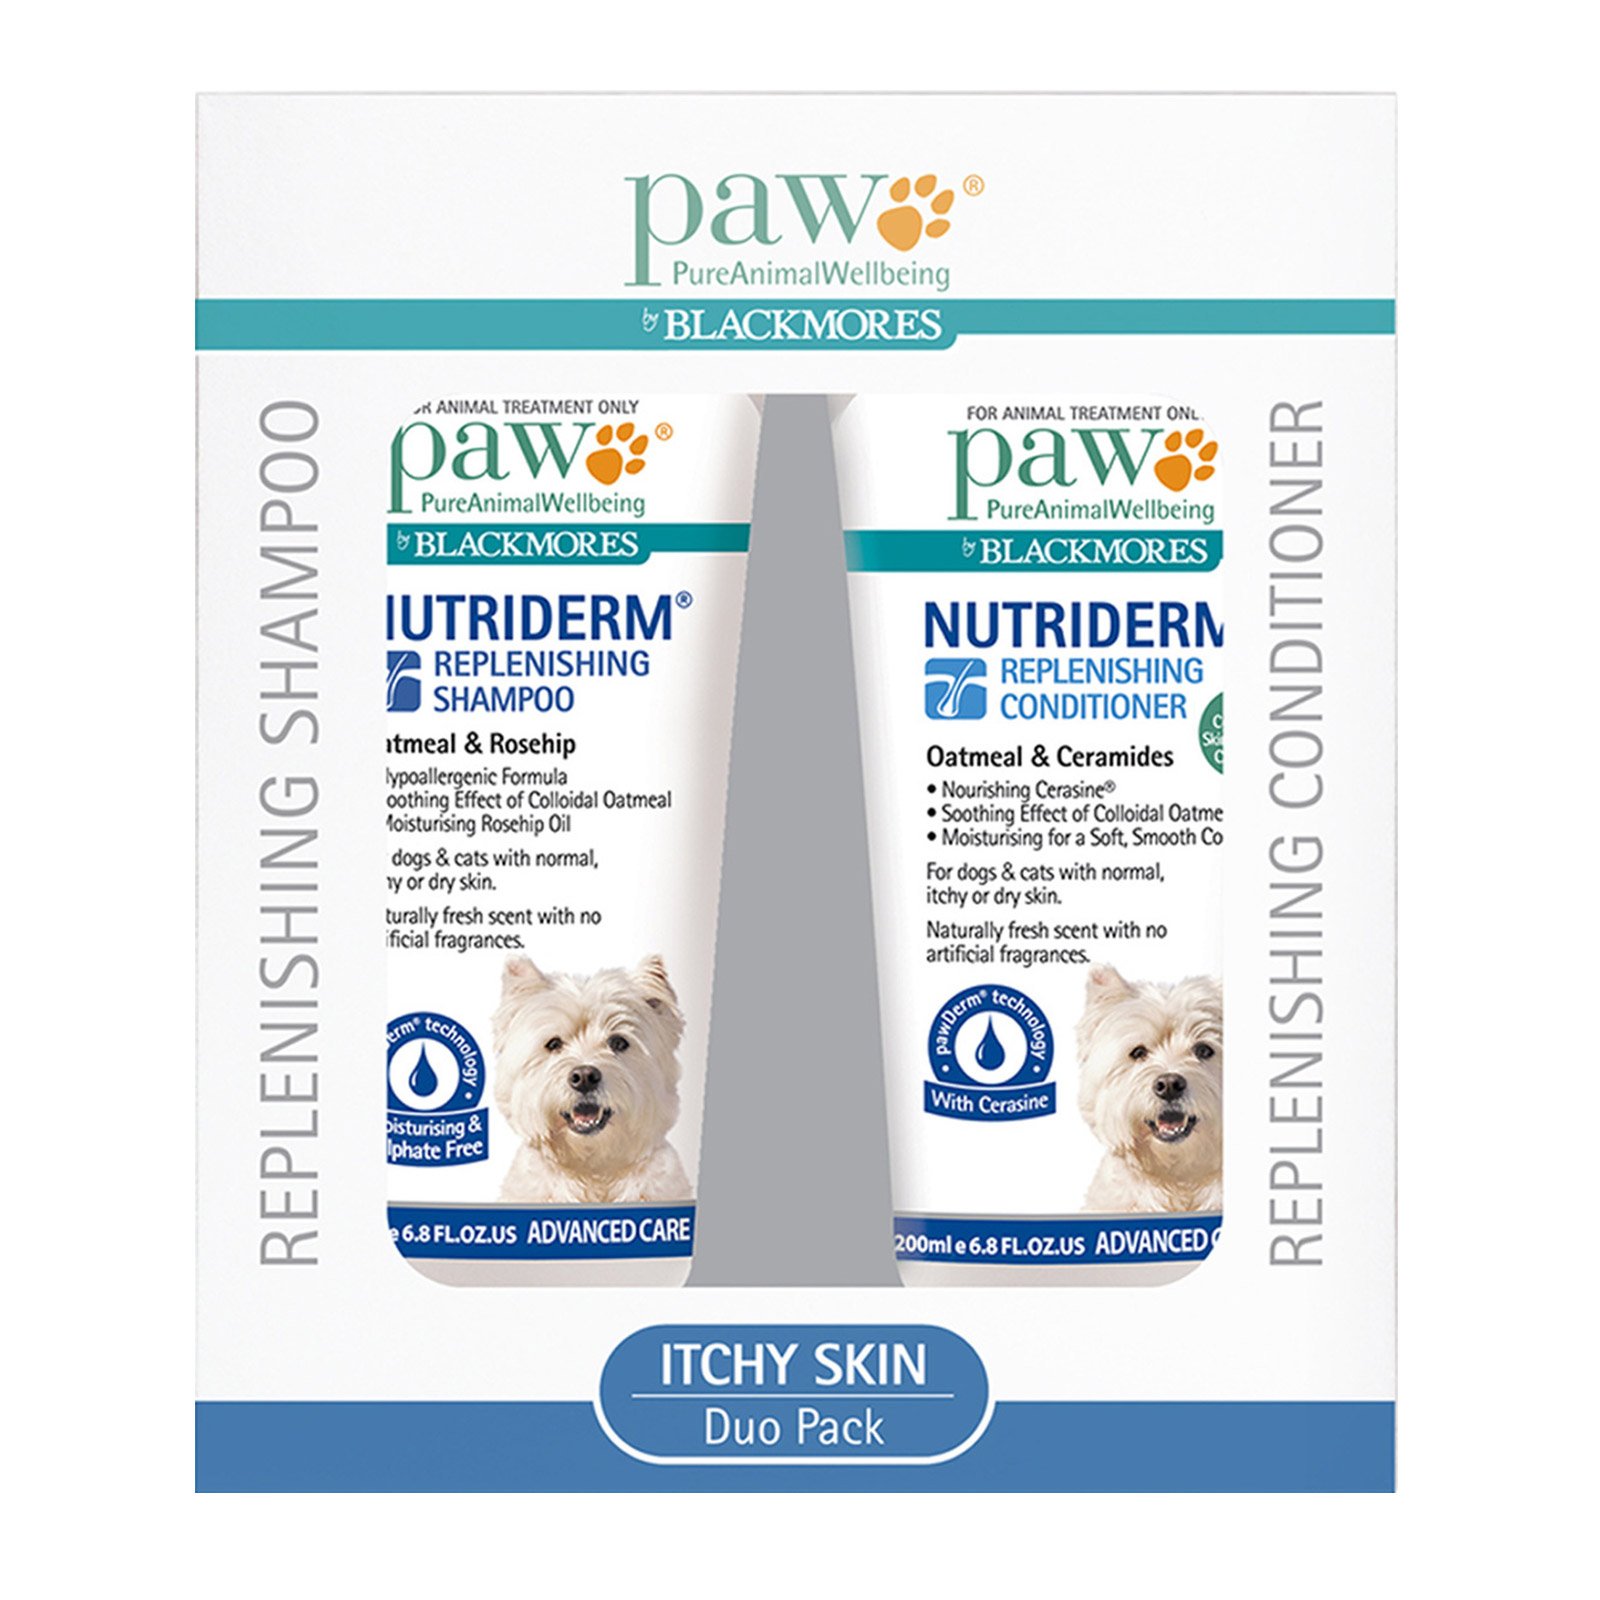 PAW Nutriderm Itchy Skin Duo Pack